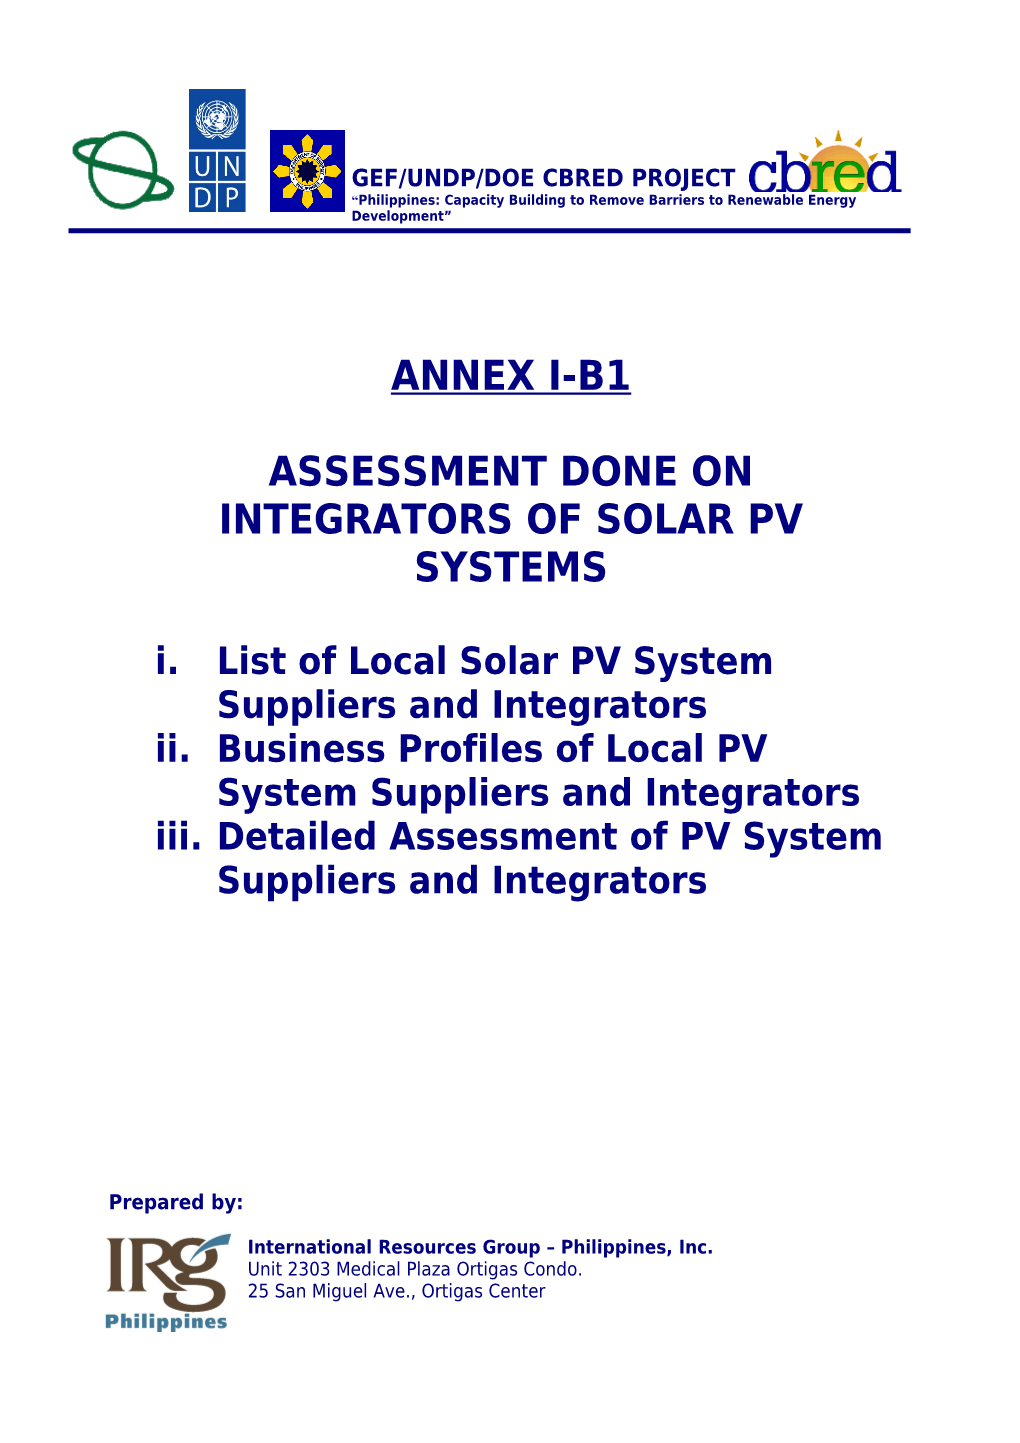 Assessment Done on Integrators of Solar Pv Systems